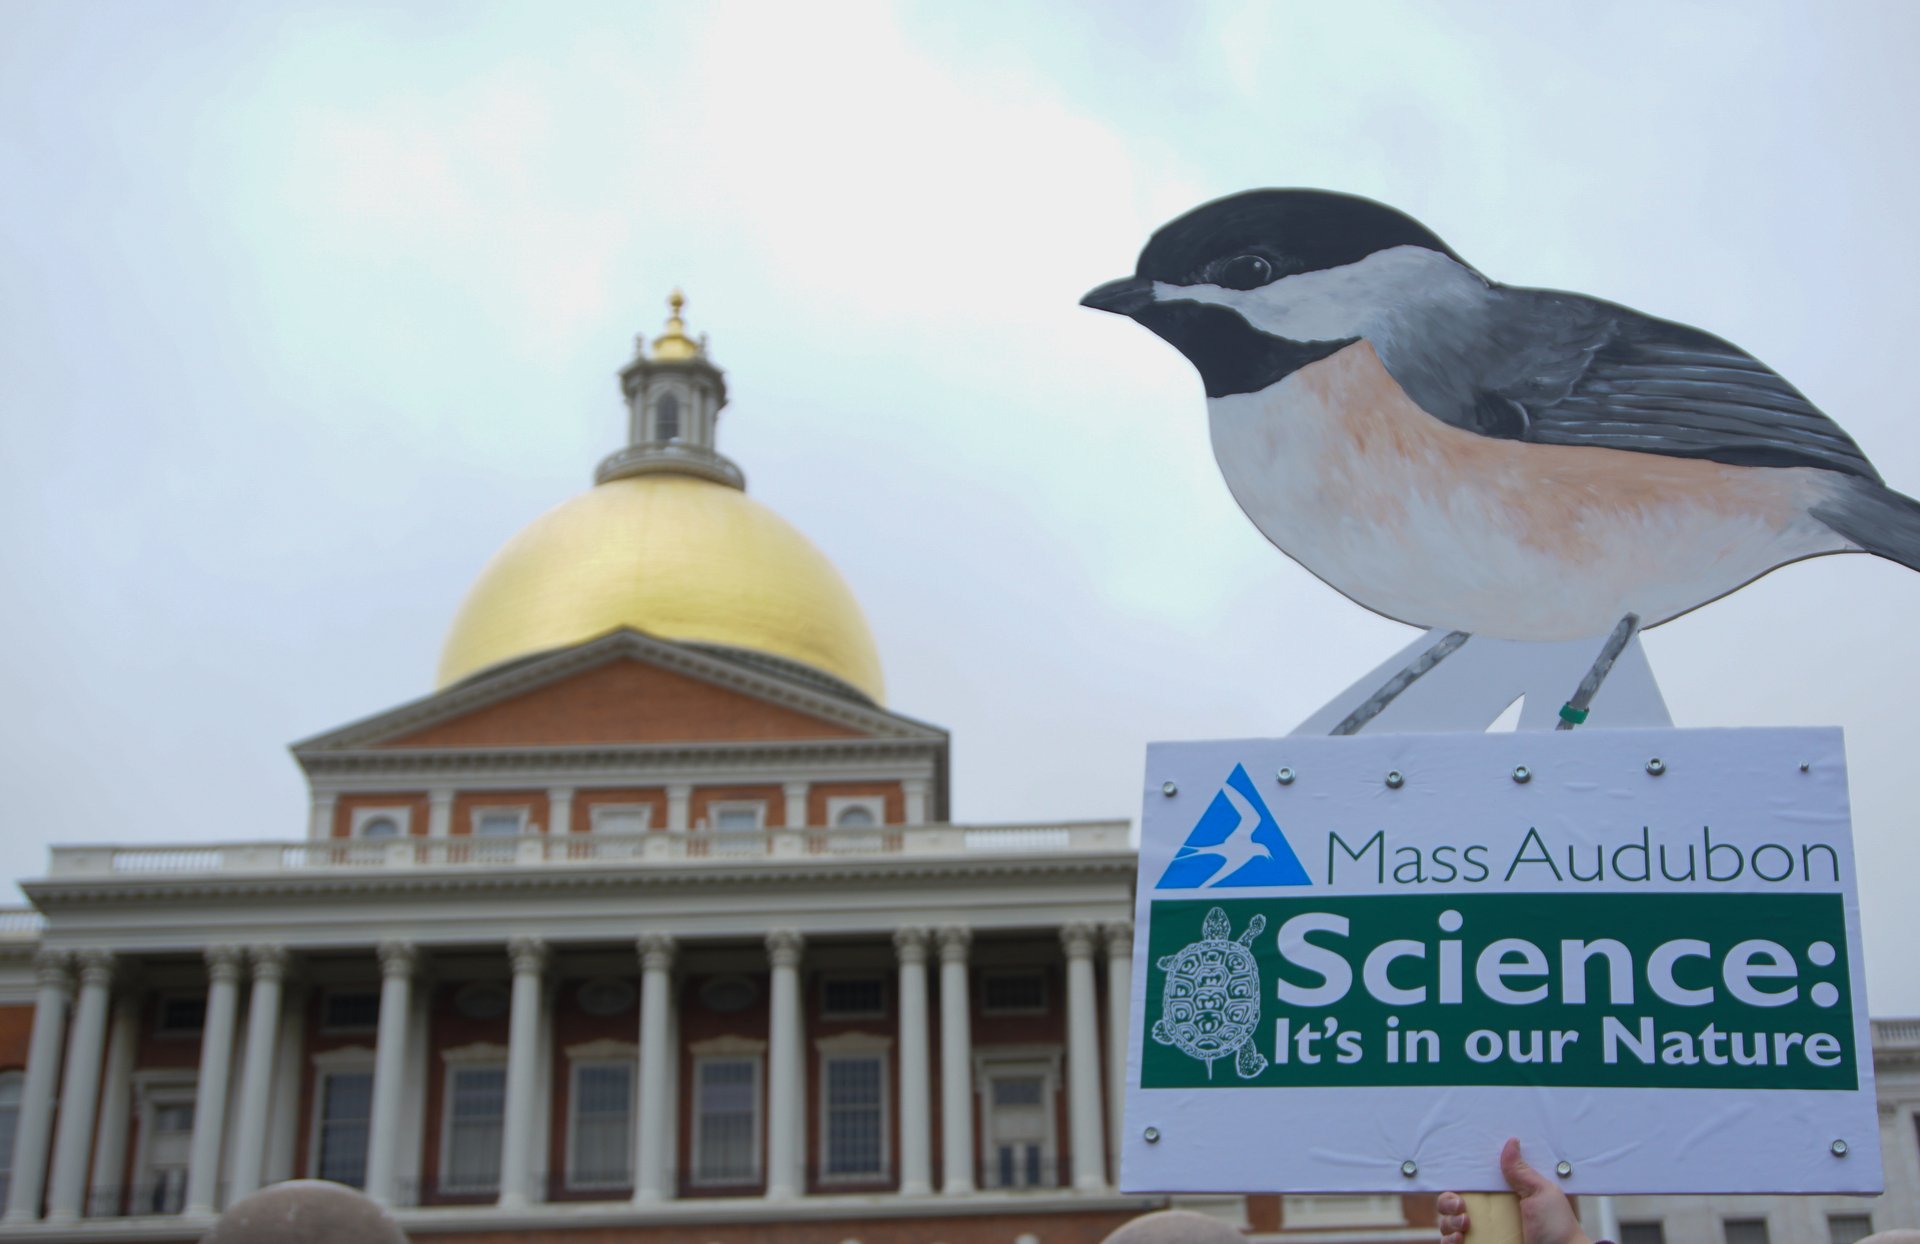 A Mass Audubon sign held in front of the state house dome